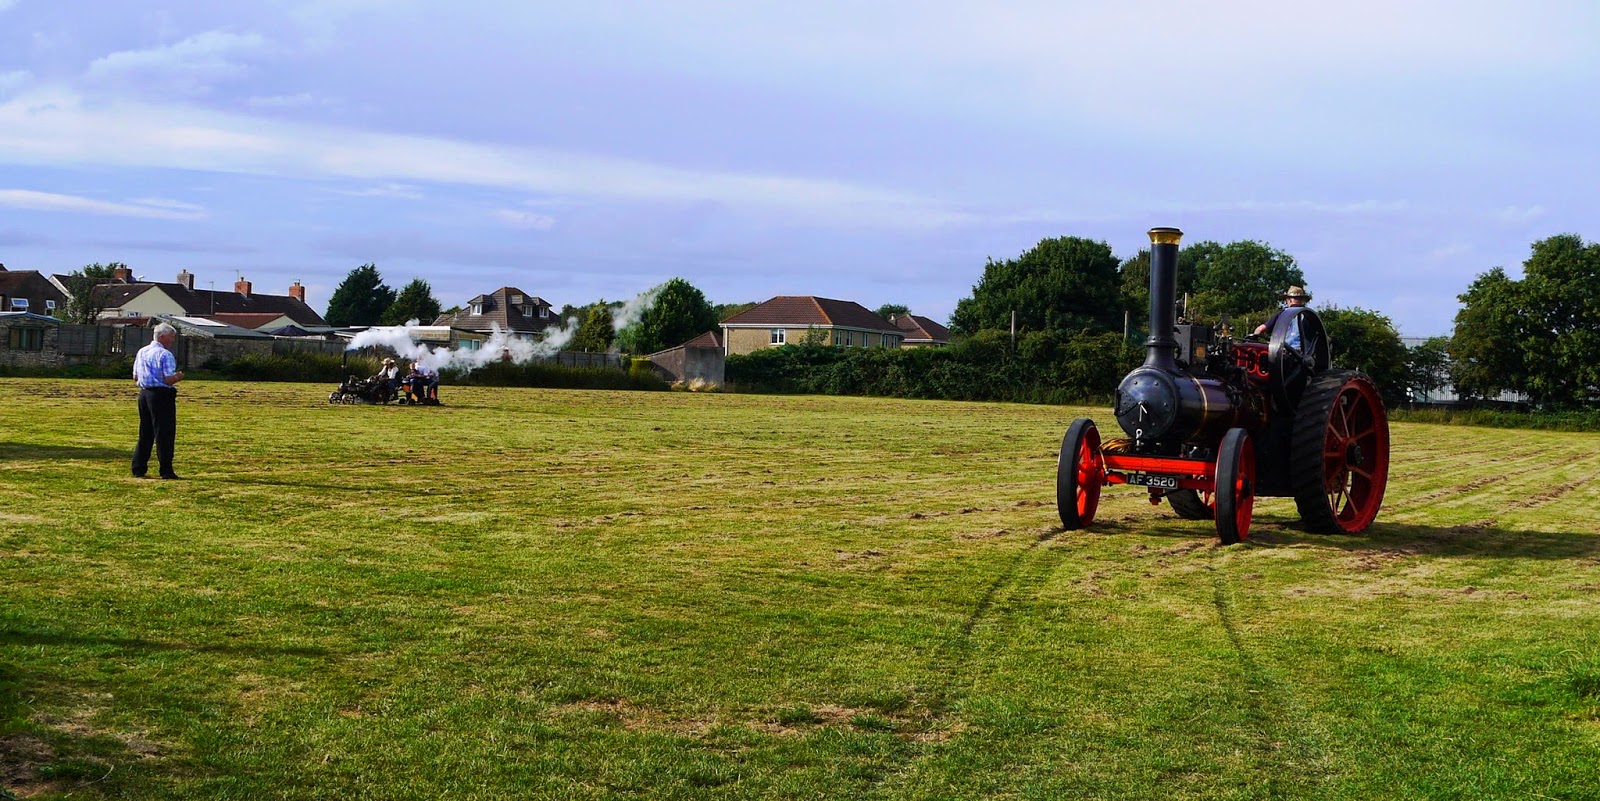 Steam engines in a field